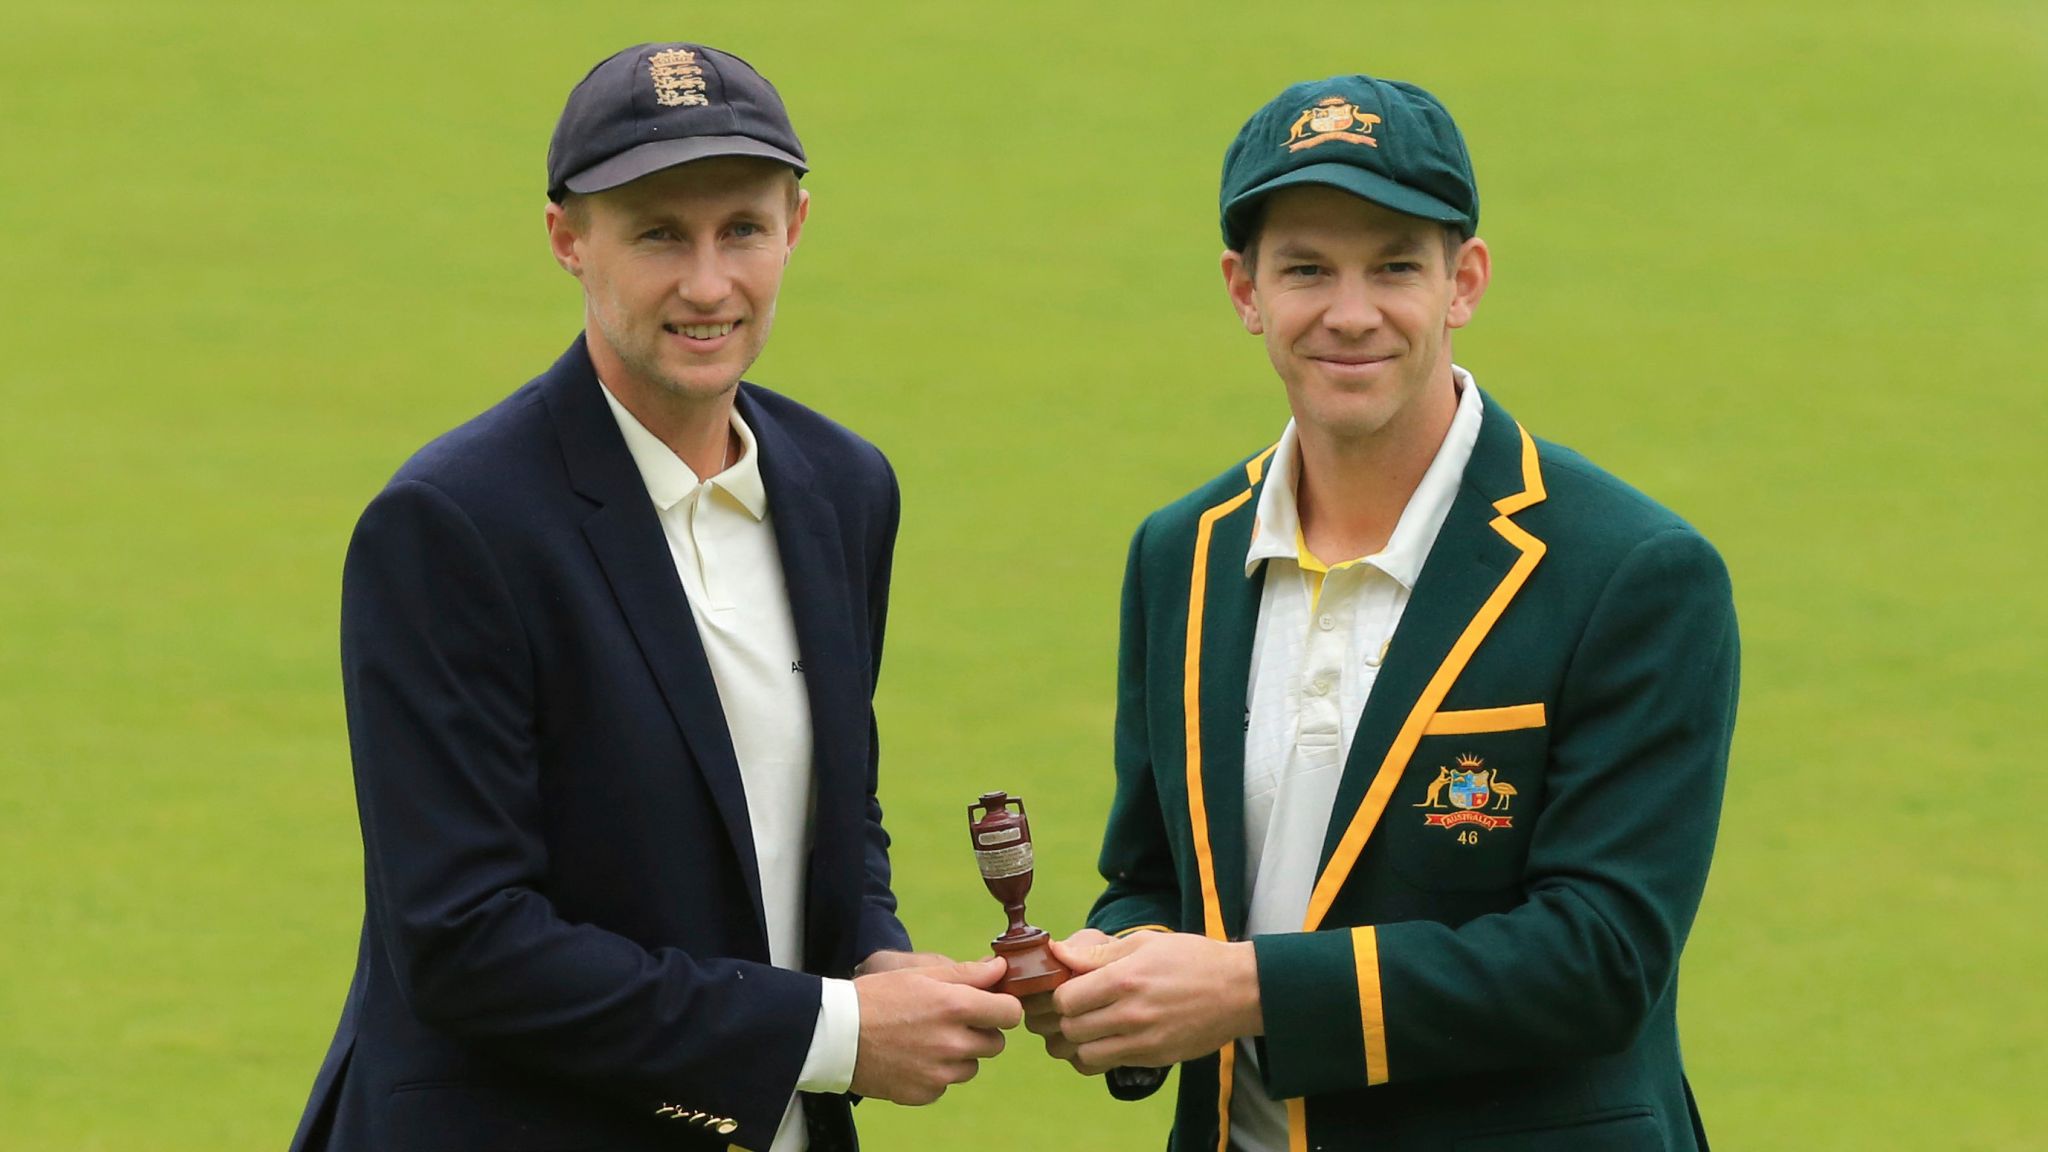 The Ashes: ECB announces England vs Australia series to go ahead subject to several conditions being met | Cricket News | Sky Sports